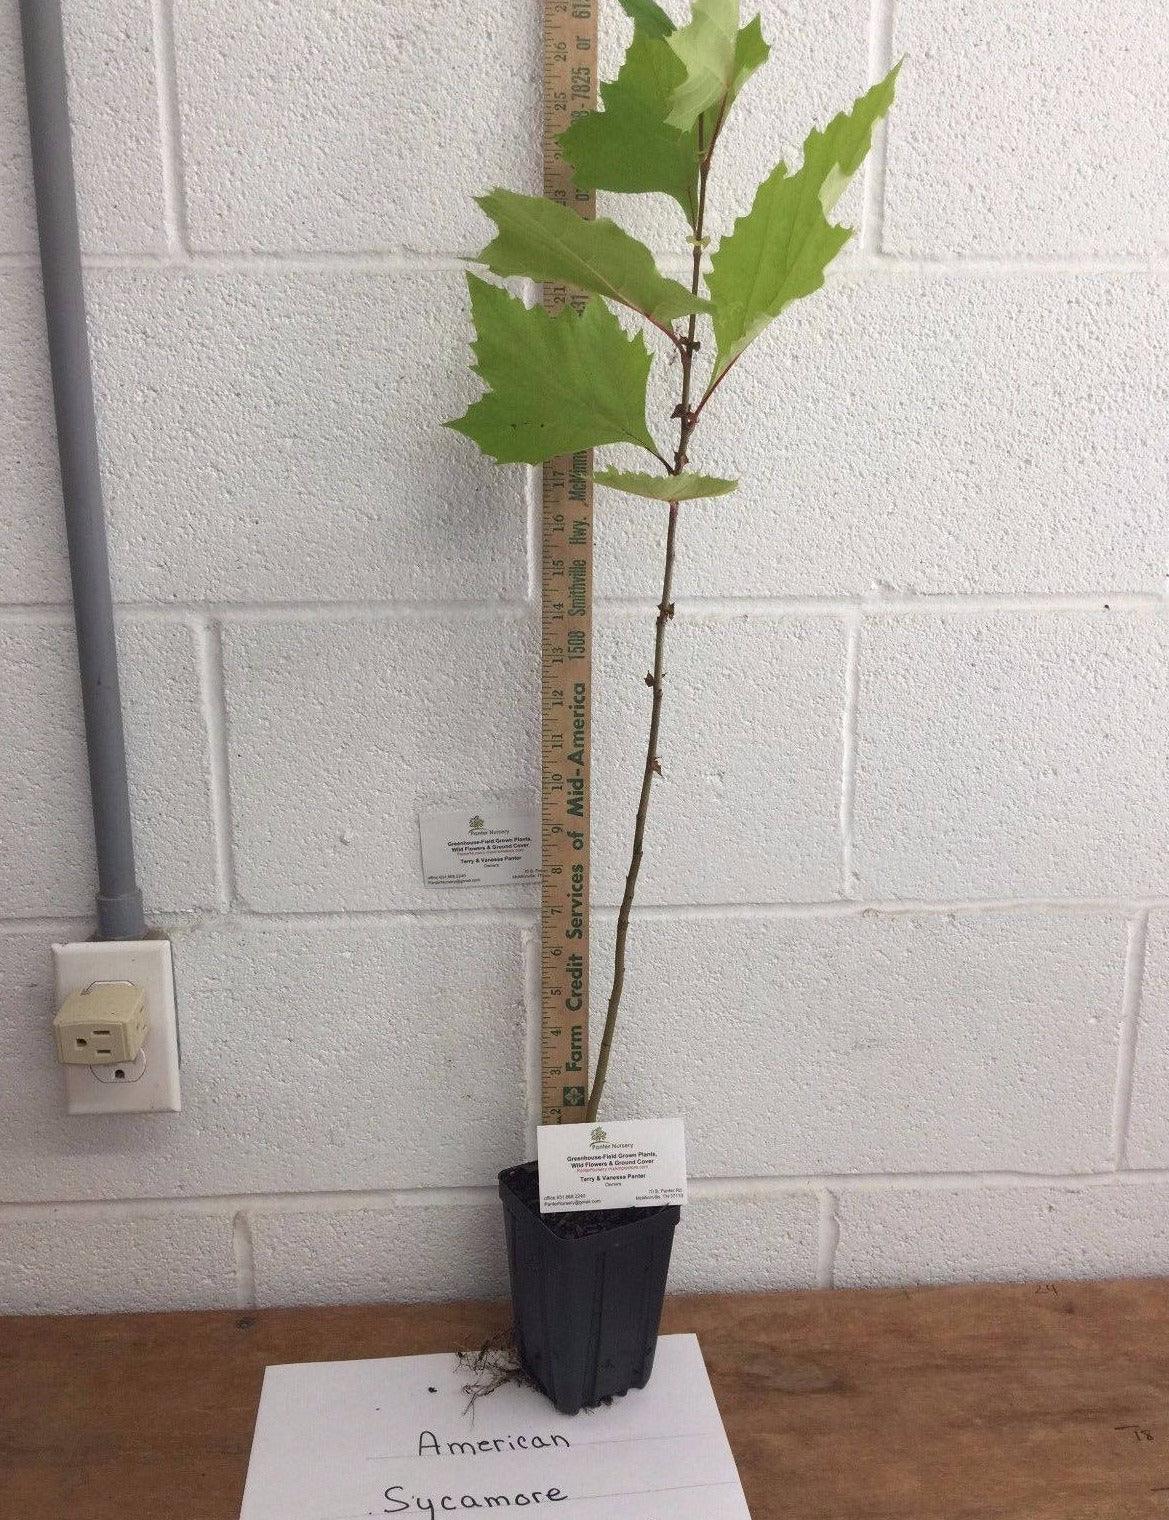 2 American Sycamore Trees - Live Plants - 10-12" Tall Seedlings - Quart Pots - The Nursery Center